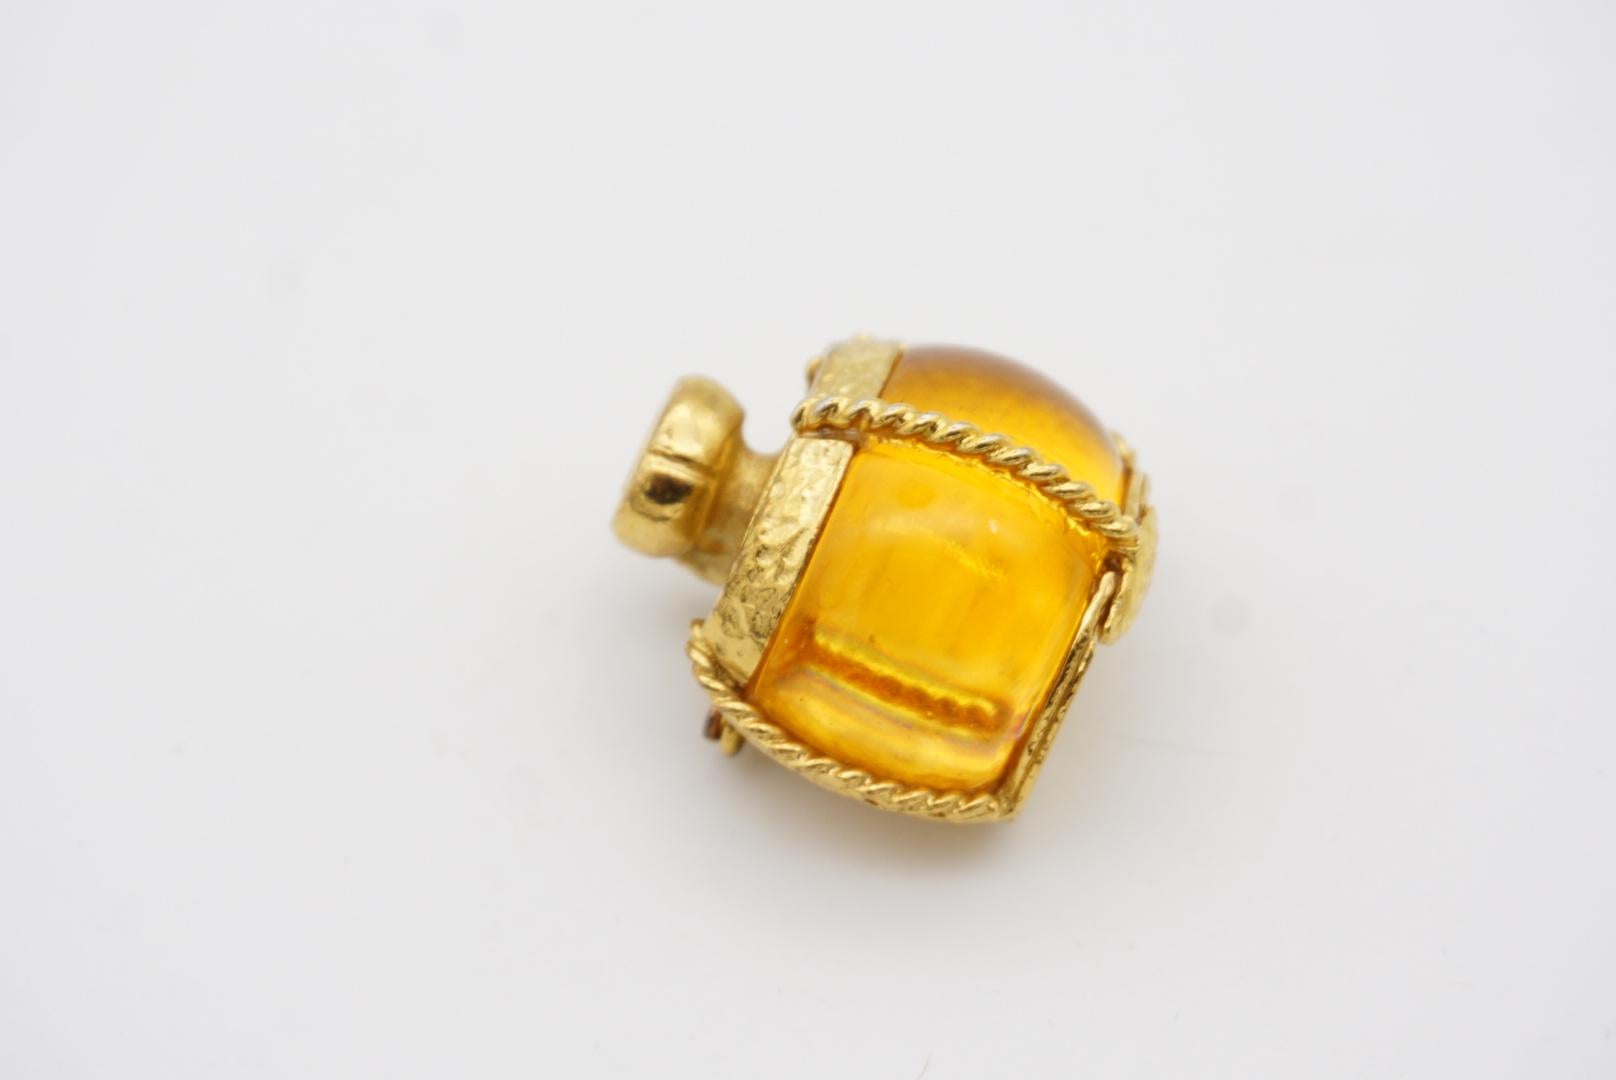 Yves Saint Laurent YSL Vintage Gripoix Amber Perfume Bottle Gold Brooch Pendant In Excellent Condition For Sale In Wokingham, England